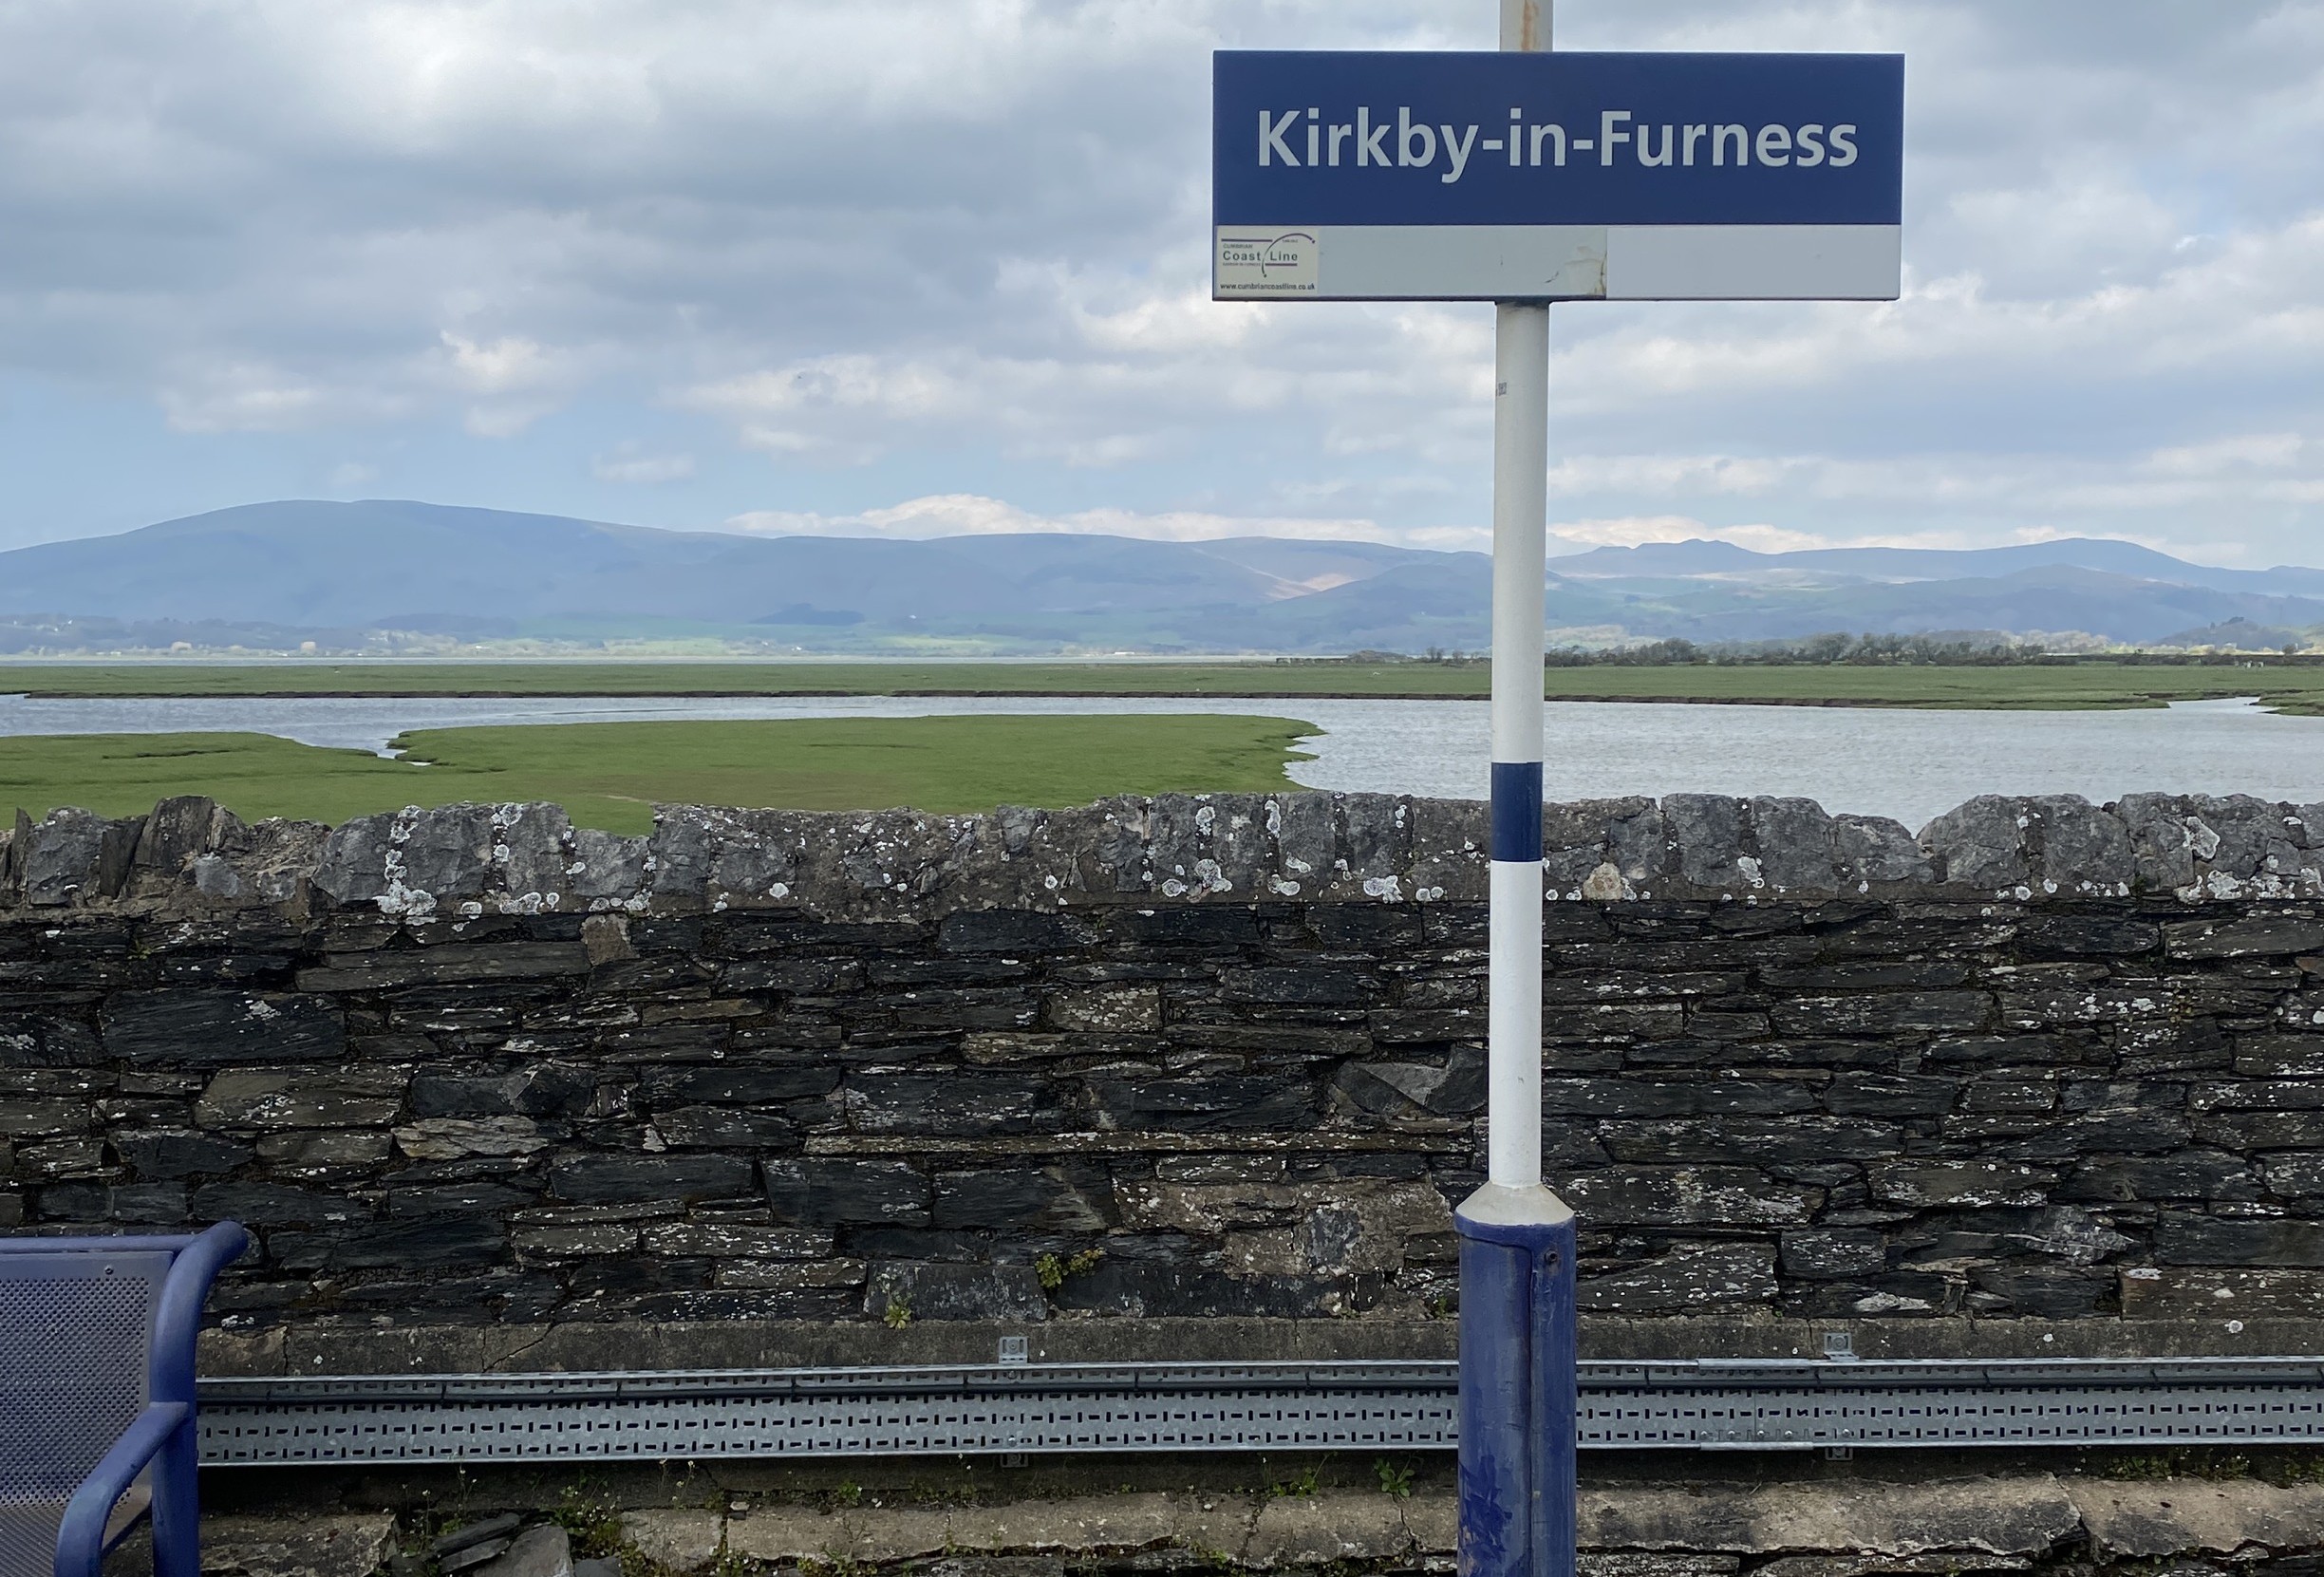 this-image-shows-the-view-at-kirkby-in-furness-on-the-furness-line